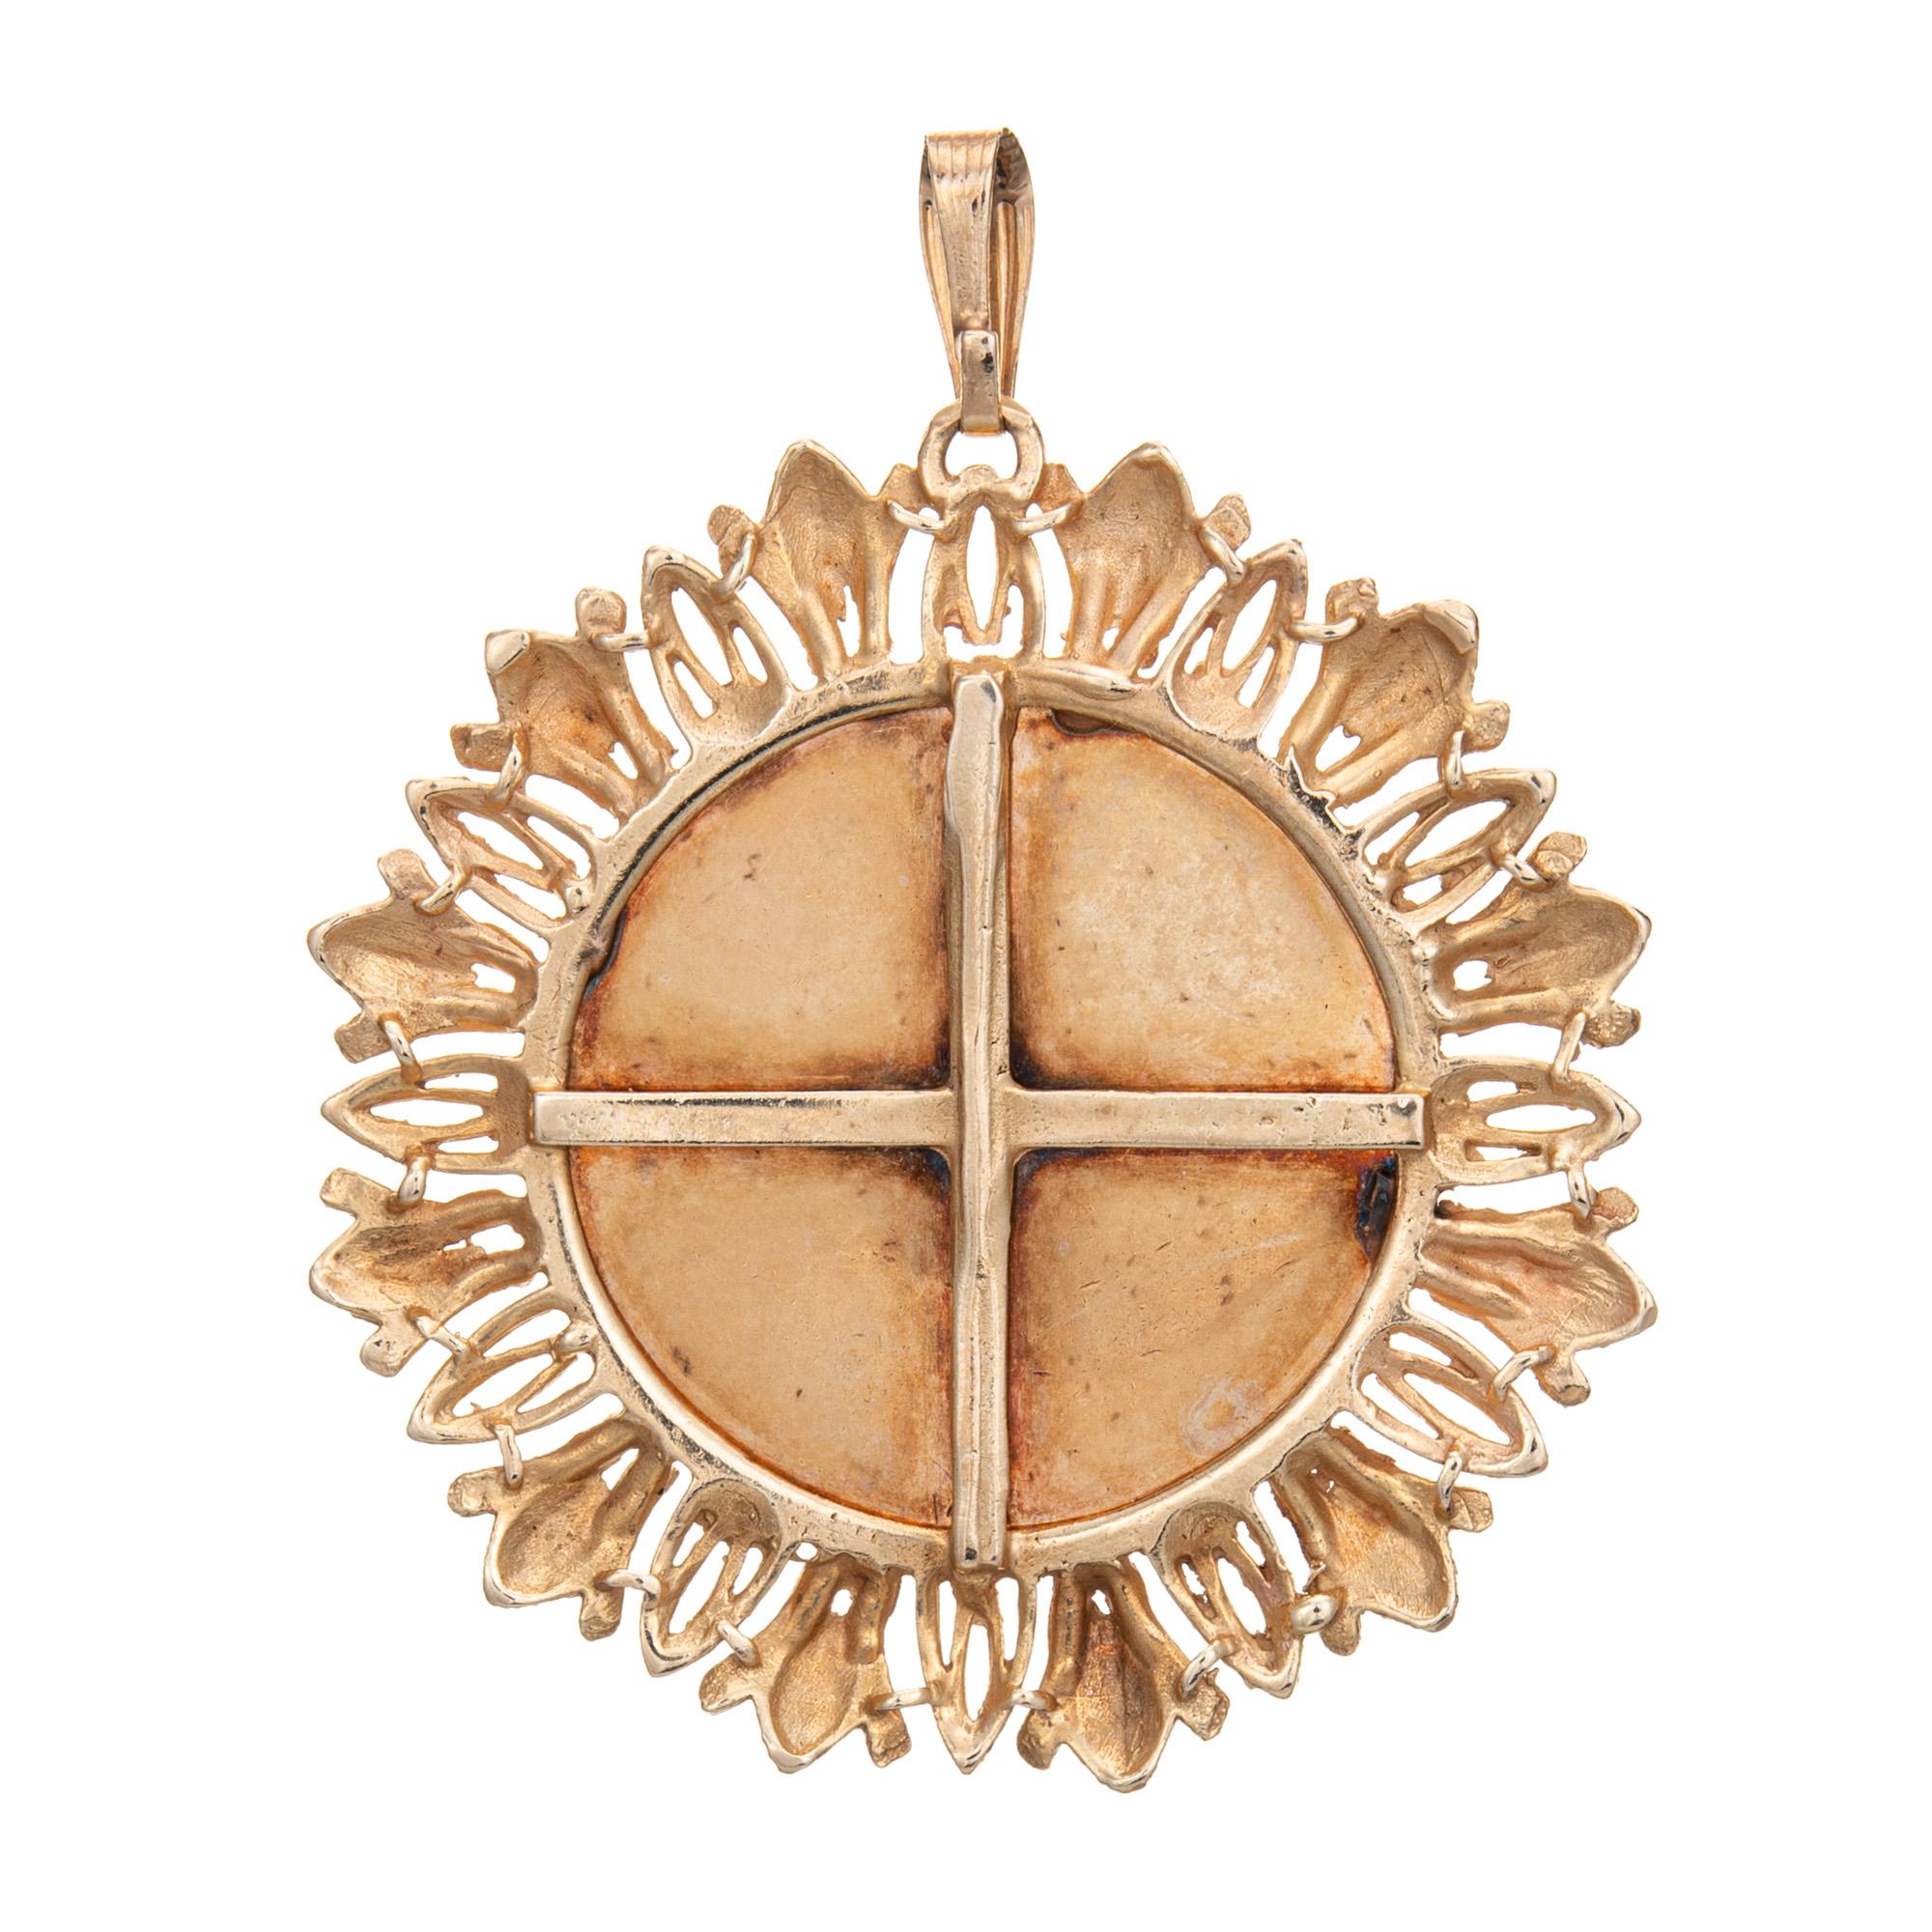 Finely detailed large Capricorn medallion pendant crafted in 14k yellow gold (circa 1970s).   

The large medallion pendant measures 49mm diameter (1.92 inches) and features a raised Capricorn design. The elaborate and bold design is a great example